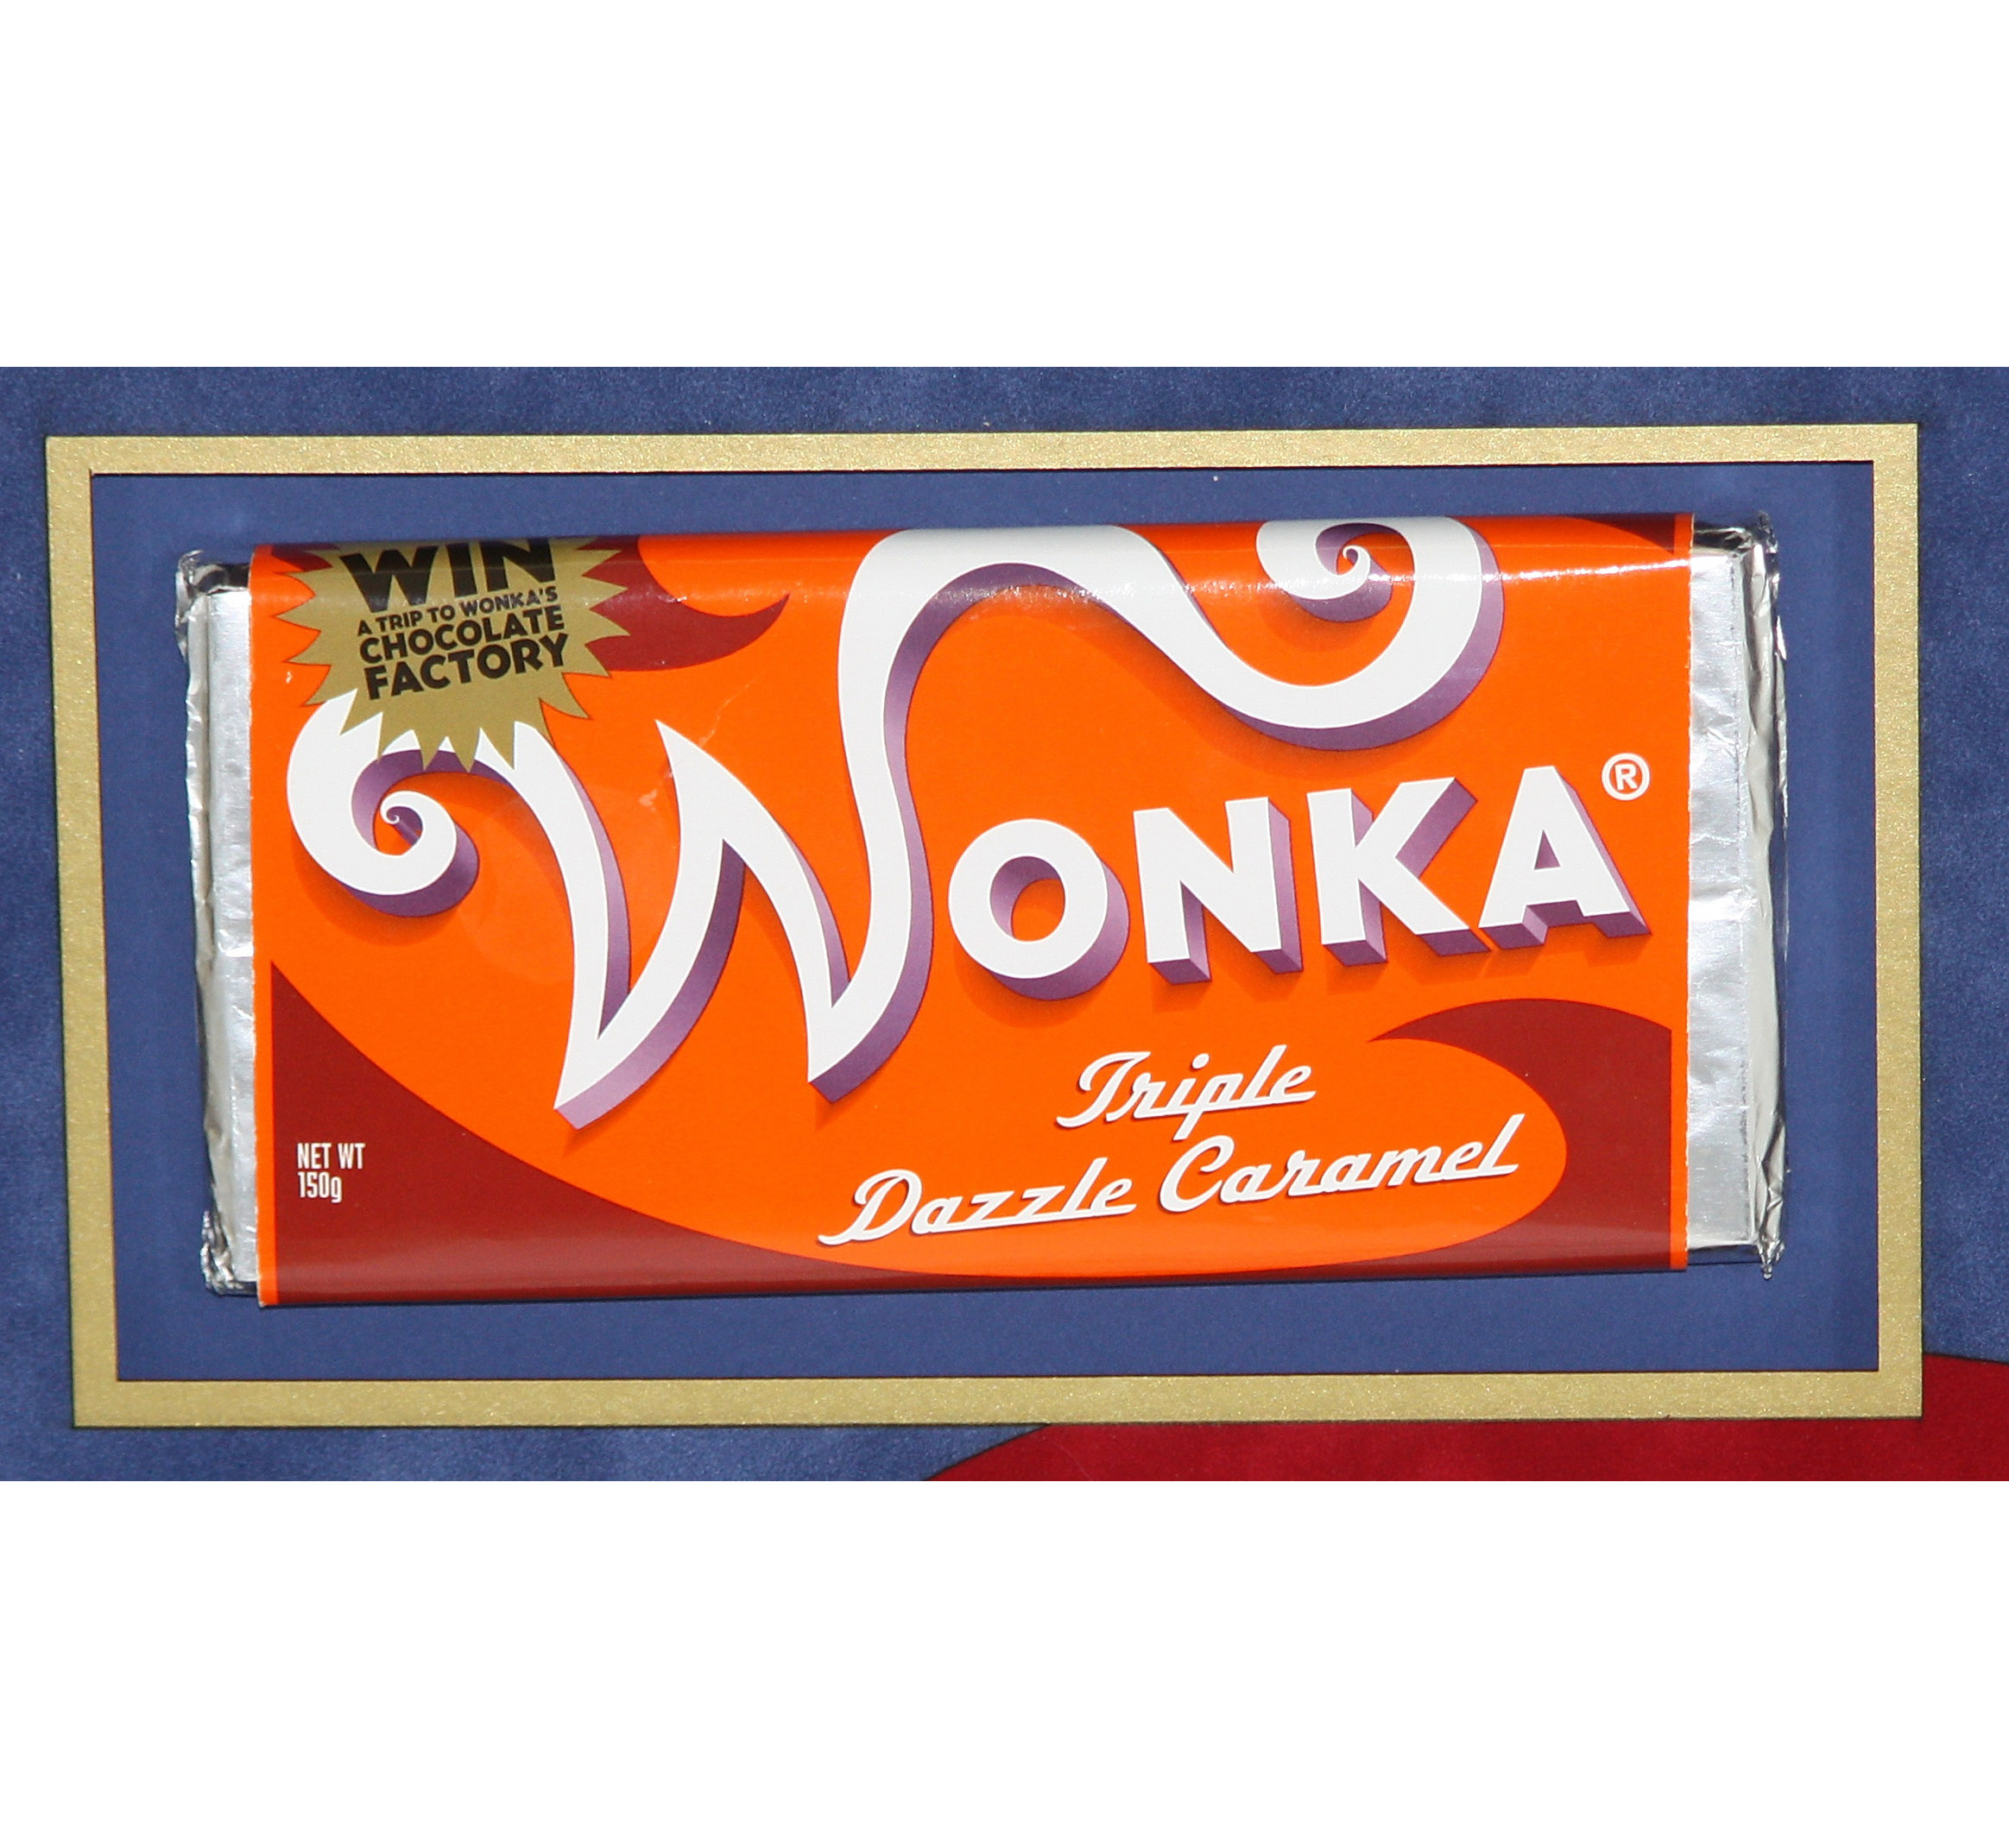 A Wonka Bar from Tim Burton's 2005 Film Charlie and the Chocolate Factory.